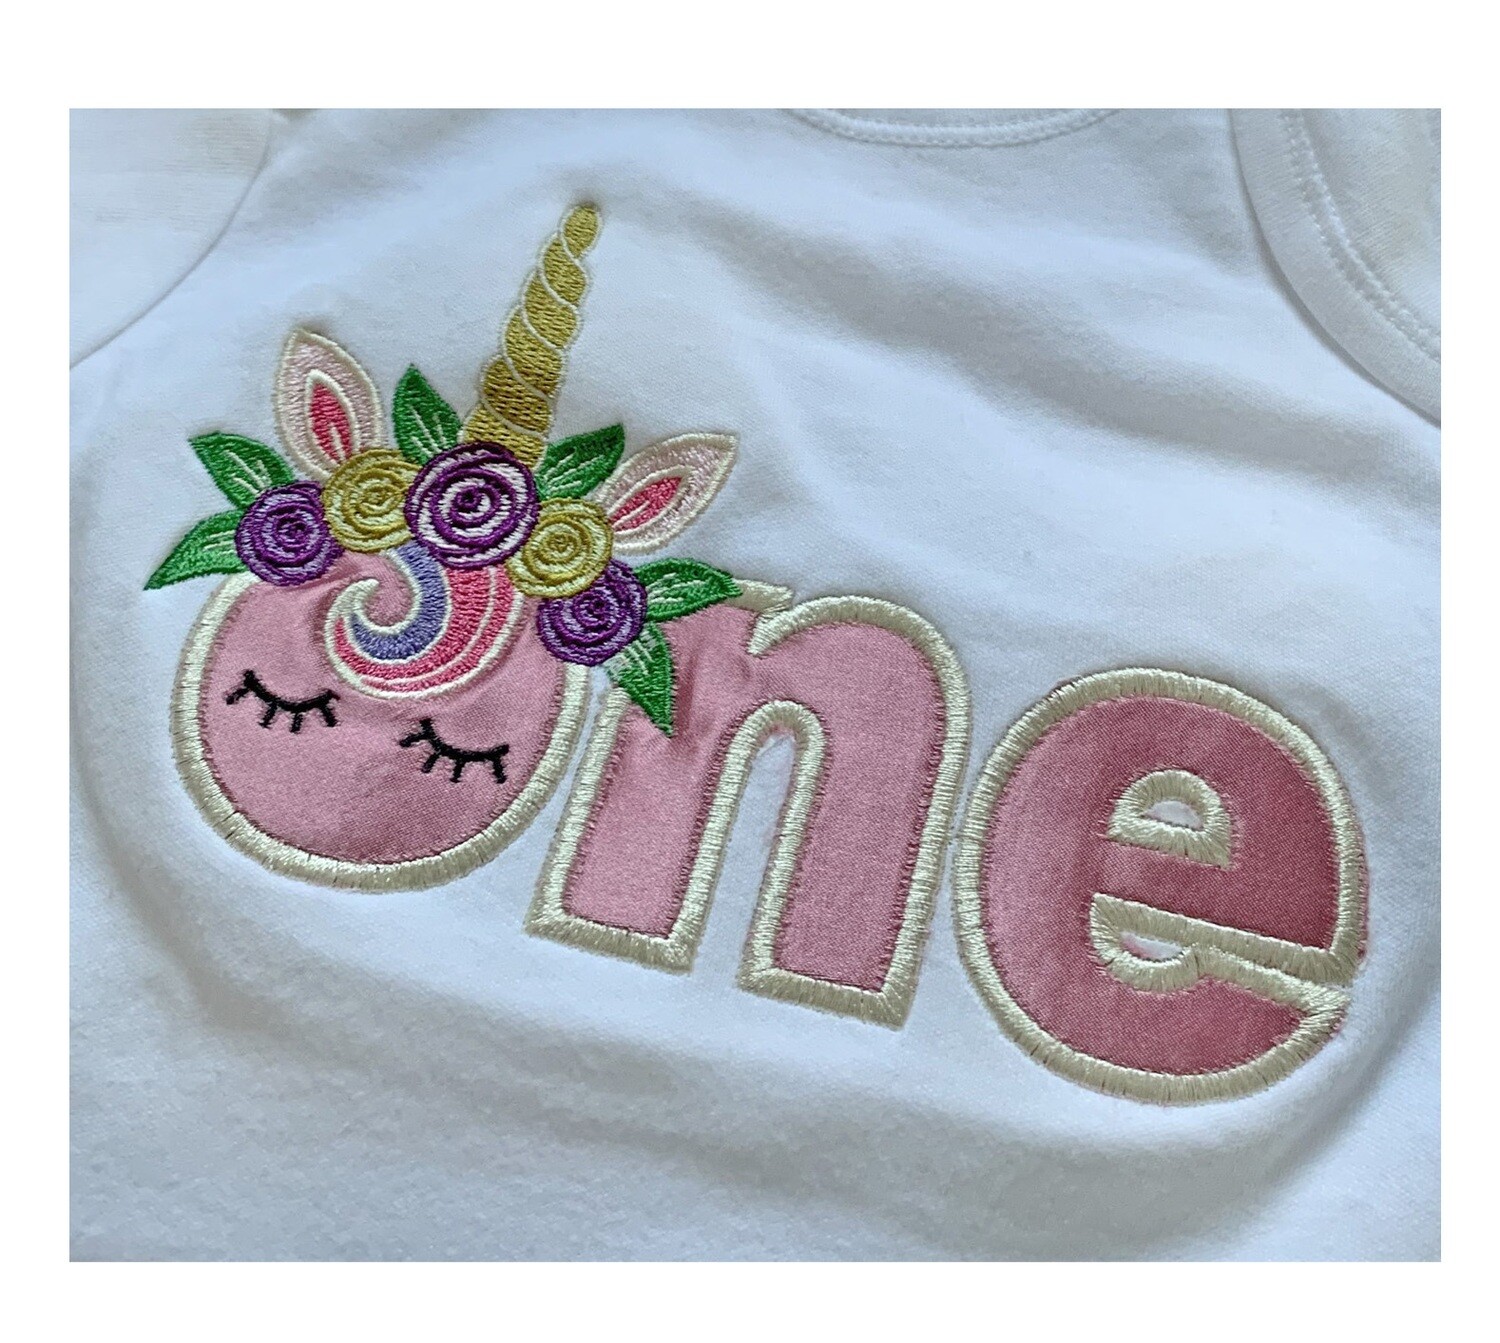 Girly onesie romper Top with ONE for 1st birthday & flowery unicorn horn personalised gifts UK